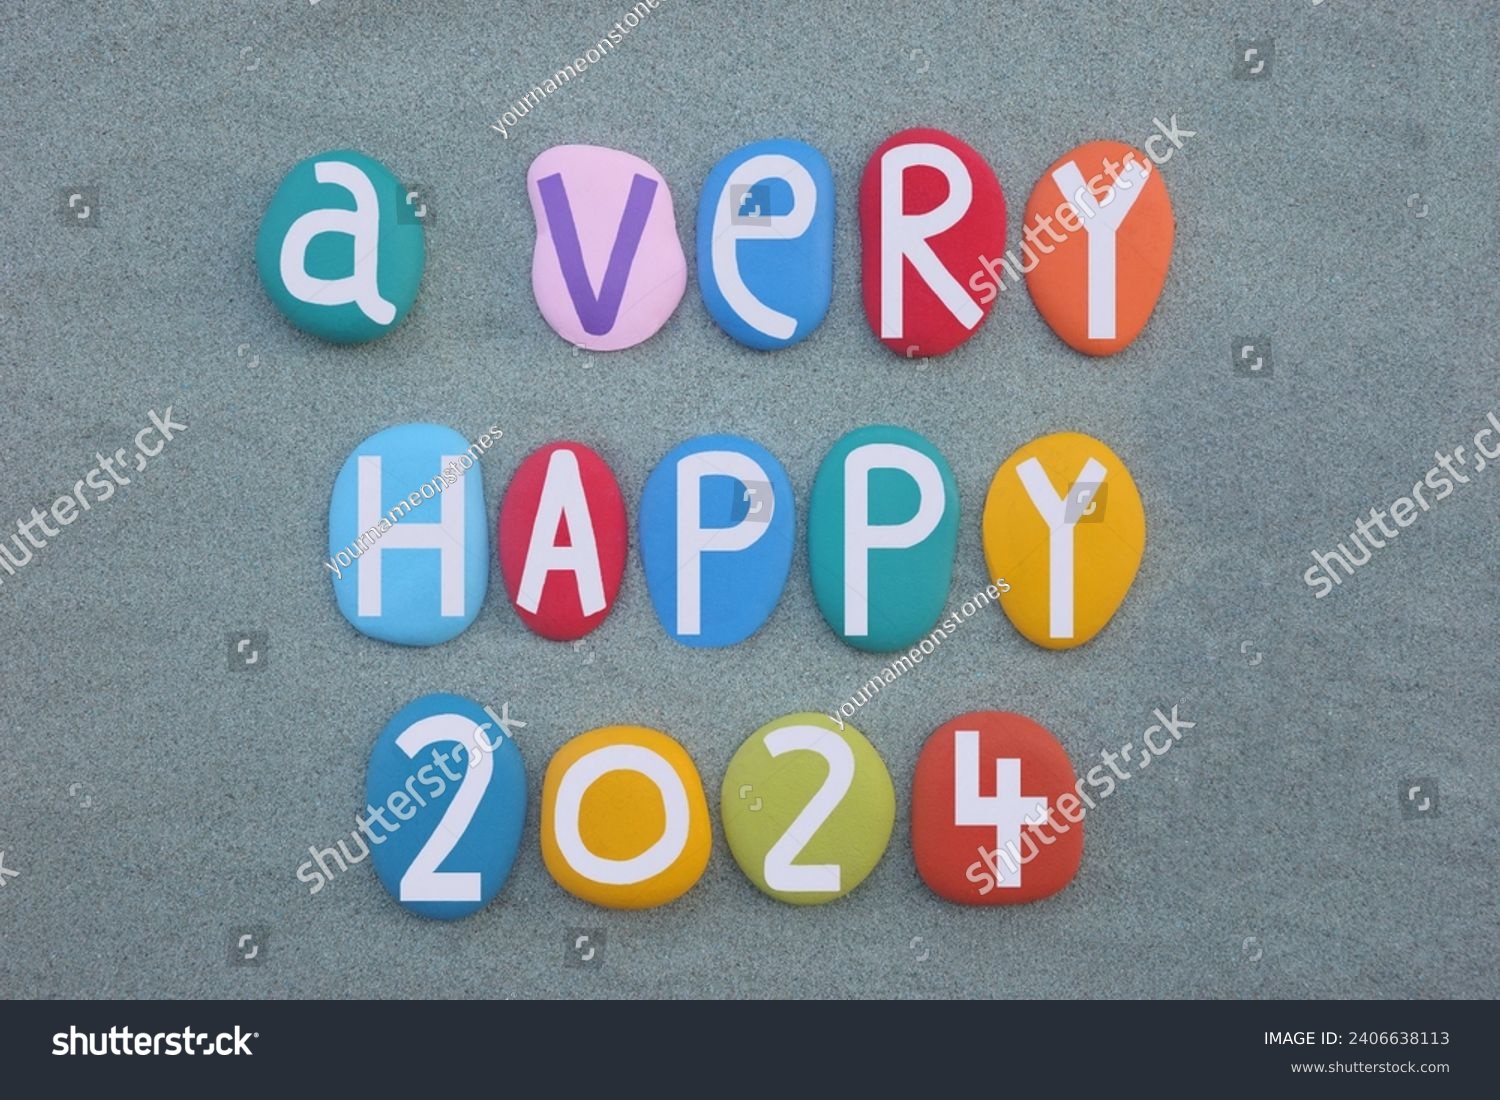 A very happy 2024 composed with hand painted multi colored stone letters and numbers over green sand #2406638113